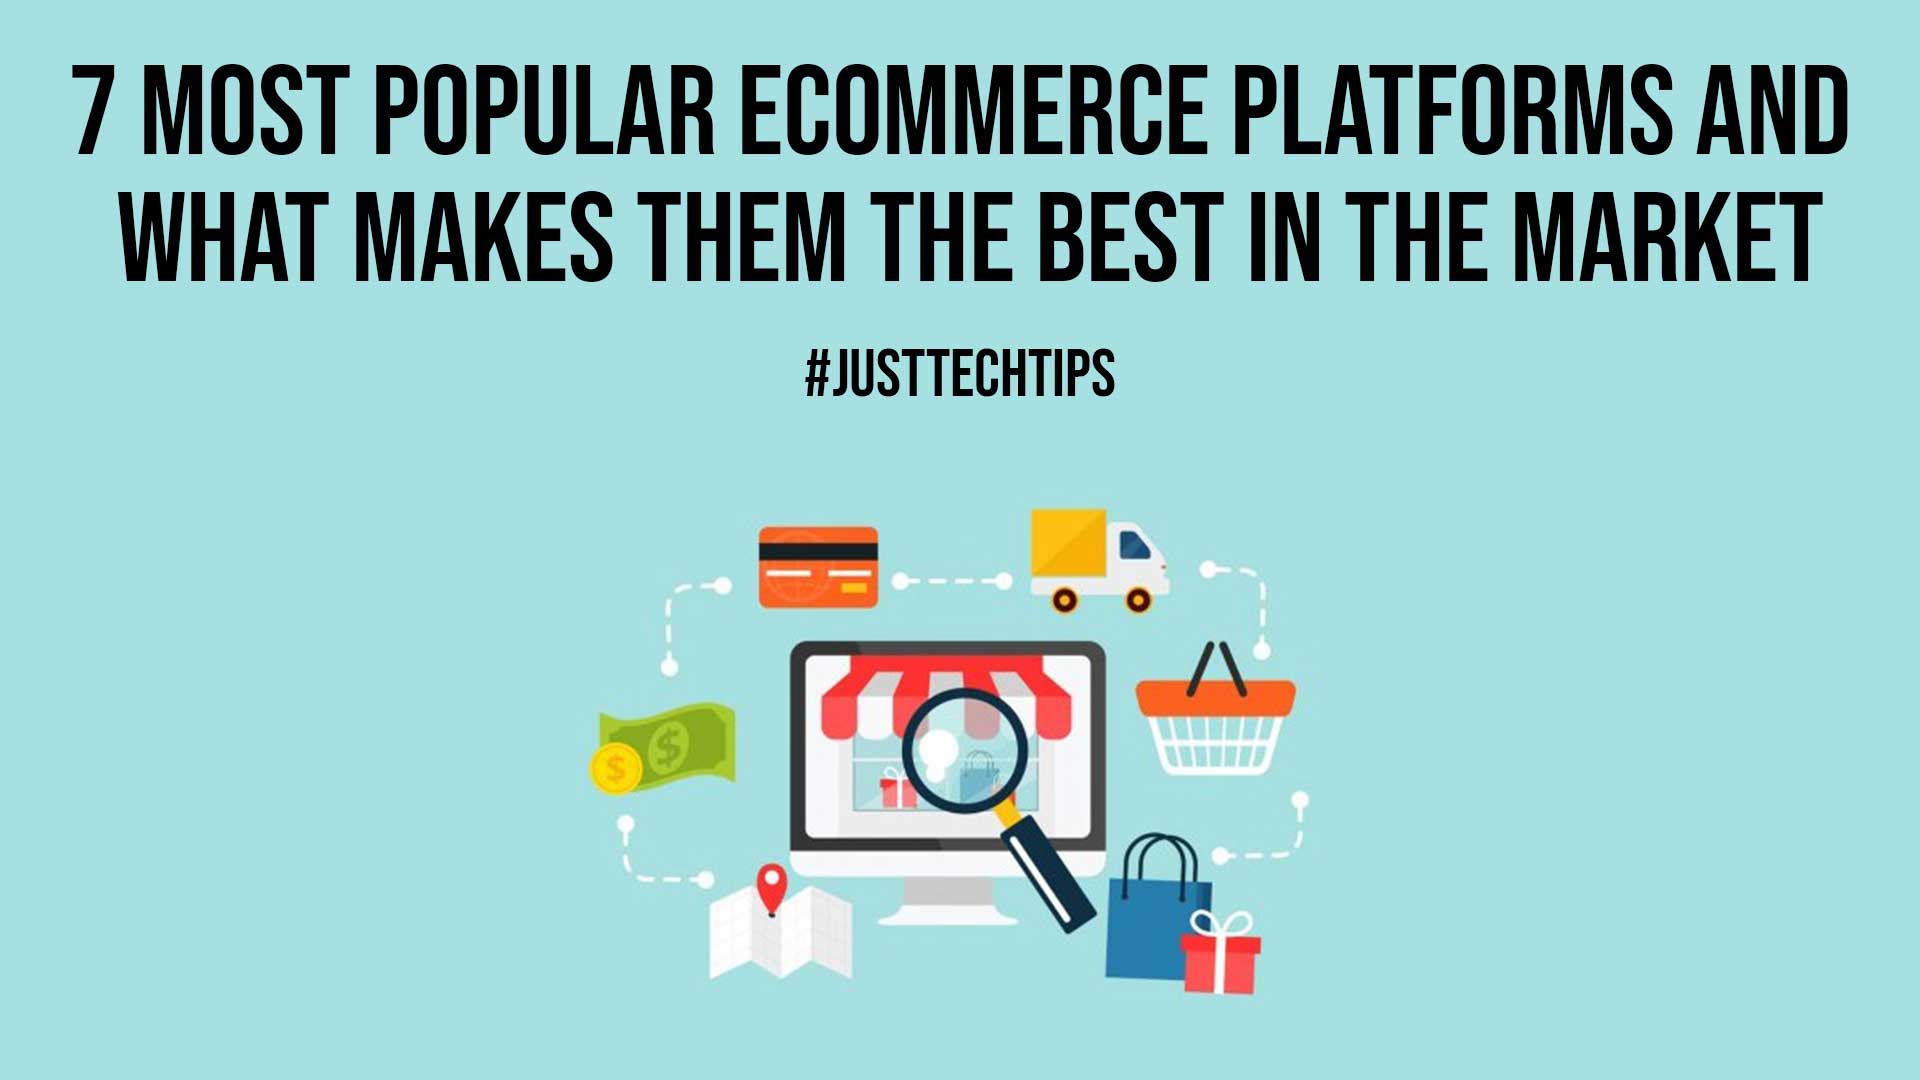 7 Most Popular eCommerce Platforms and What Makes Them The Best in The Market